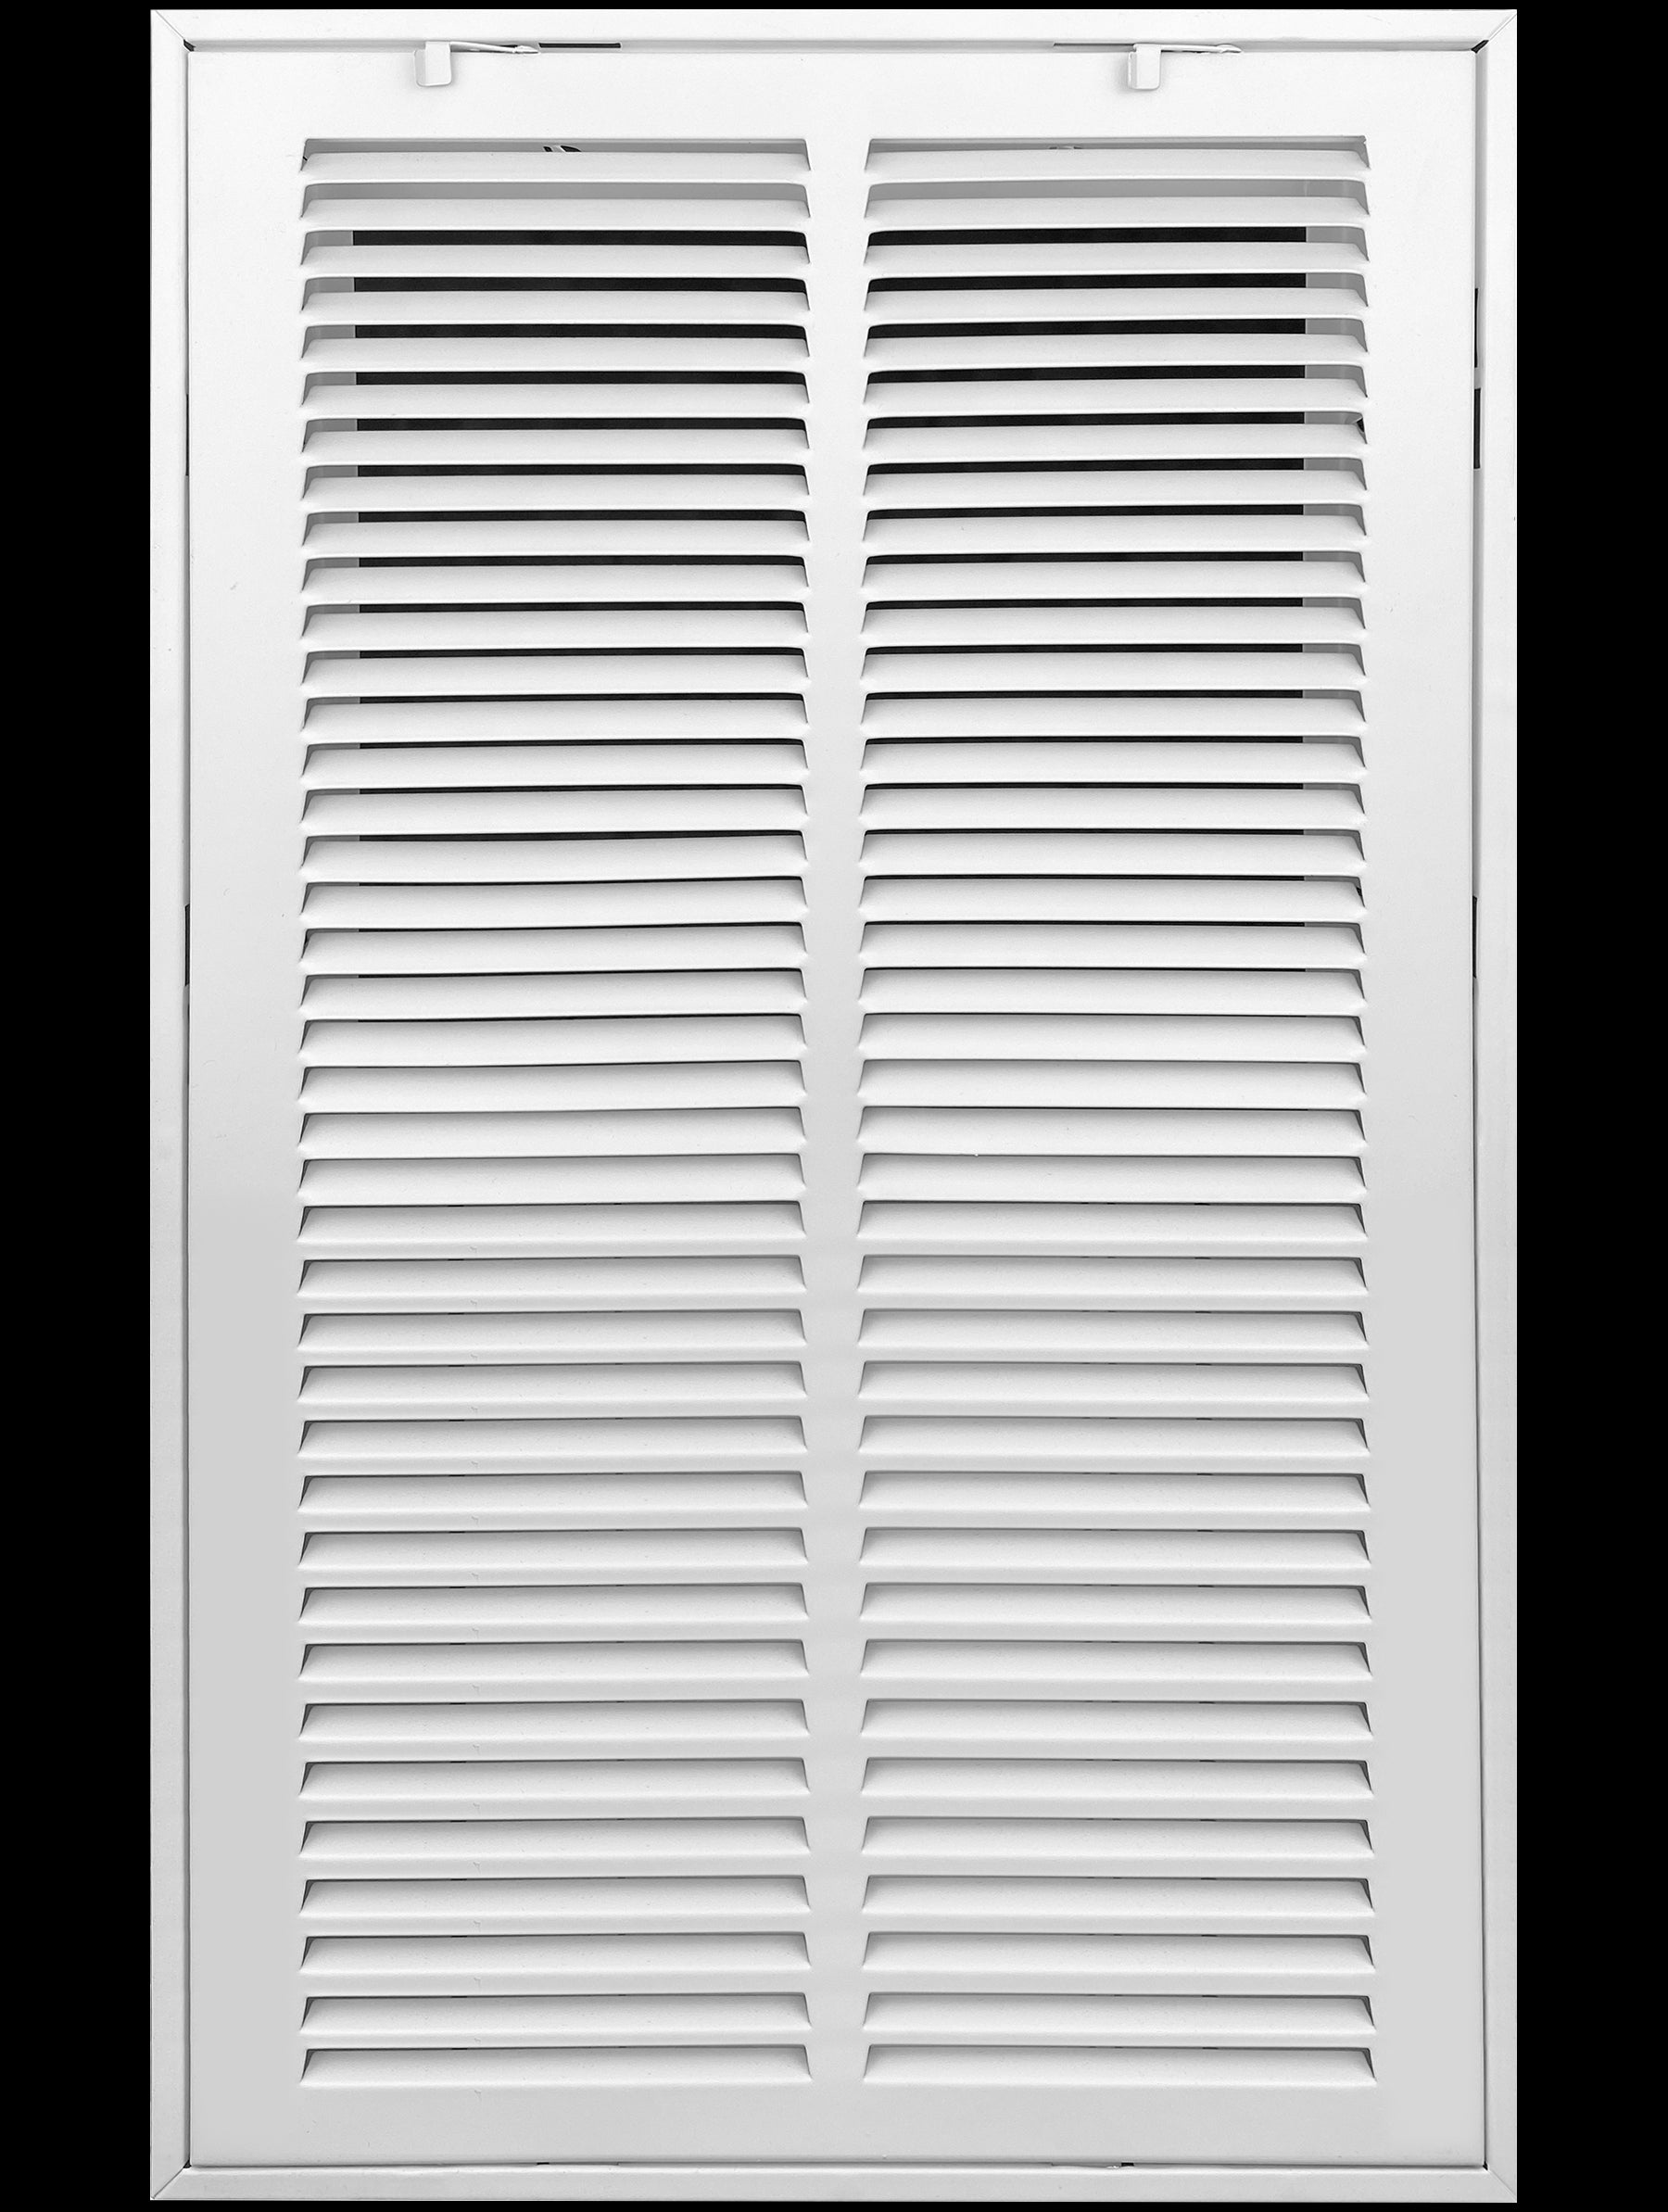 airgrilles 14" x 20" duct opening  -  hd steel return air filter grille for sidewall and ceiling 7hnd-rfg1-wh-14x20 038775638166 - 1